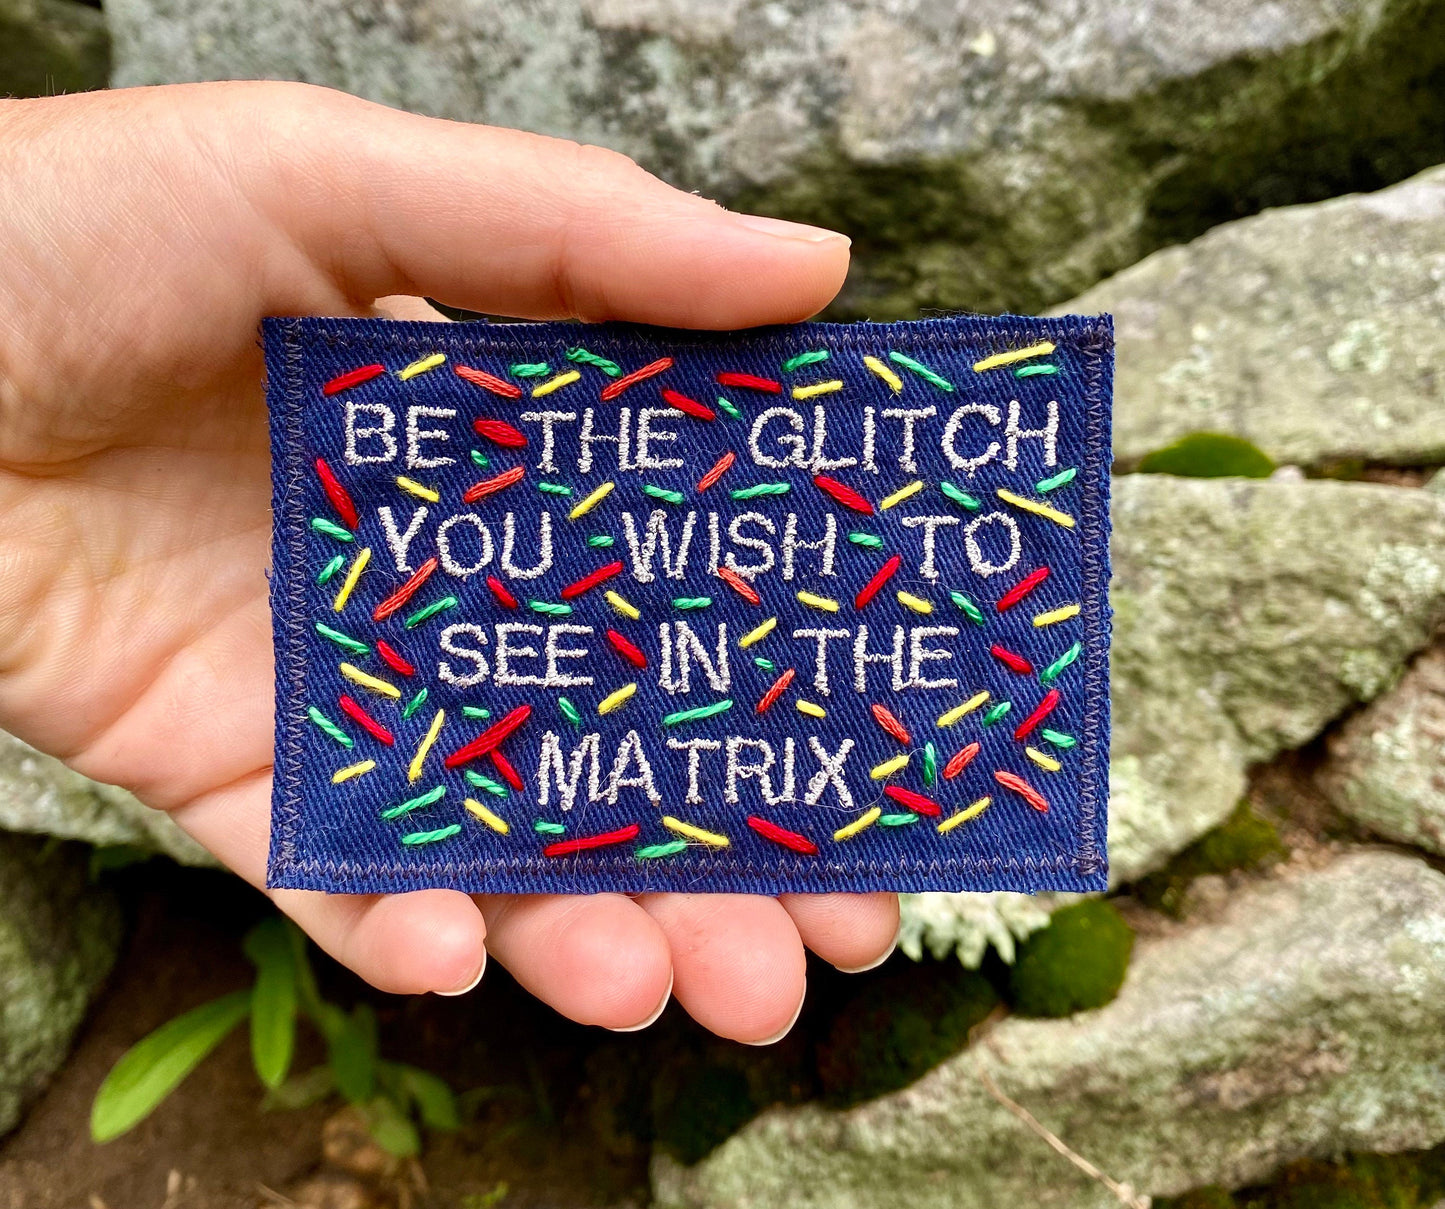 BE THE GLITCH. Handmade Embroidered Canvas Patch.